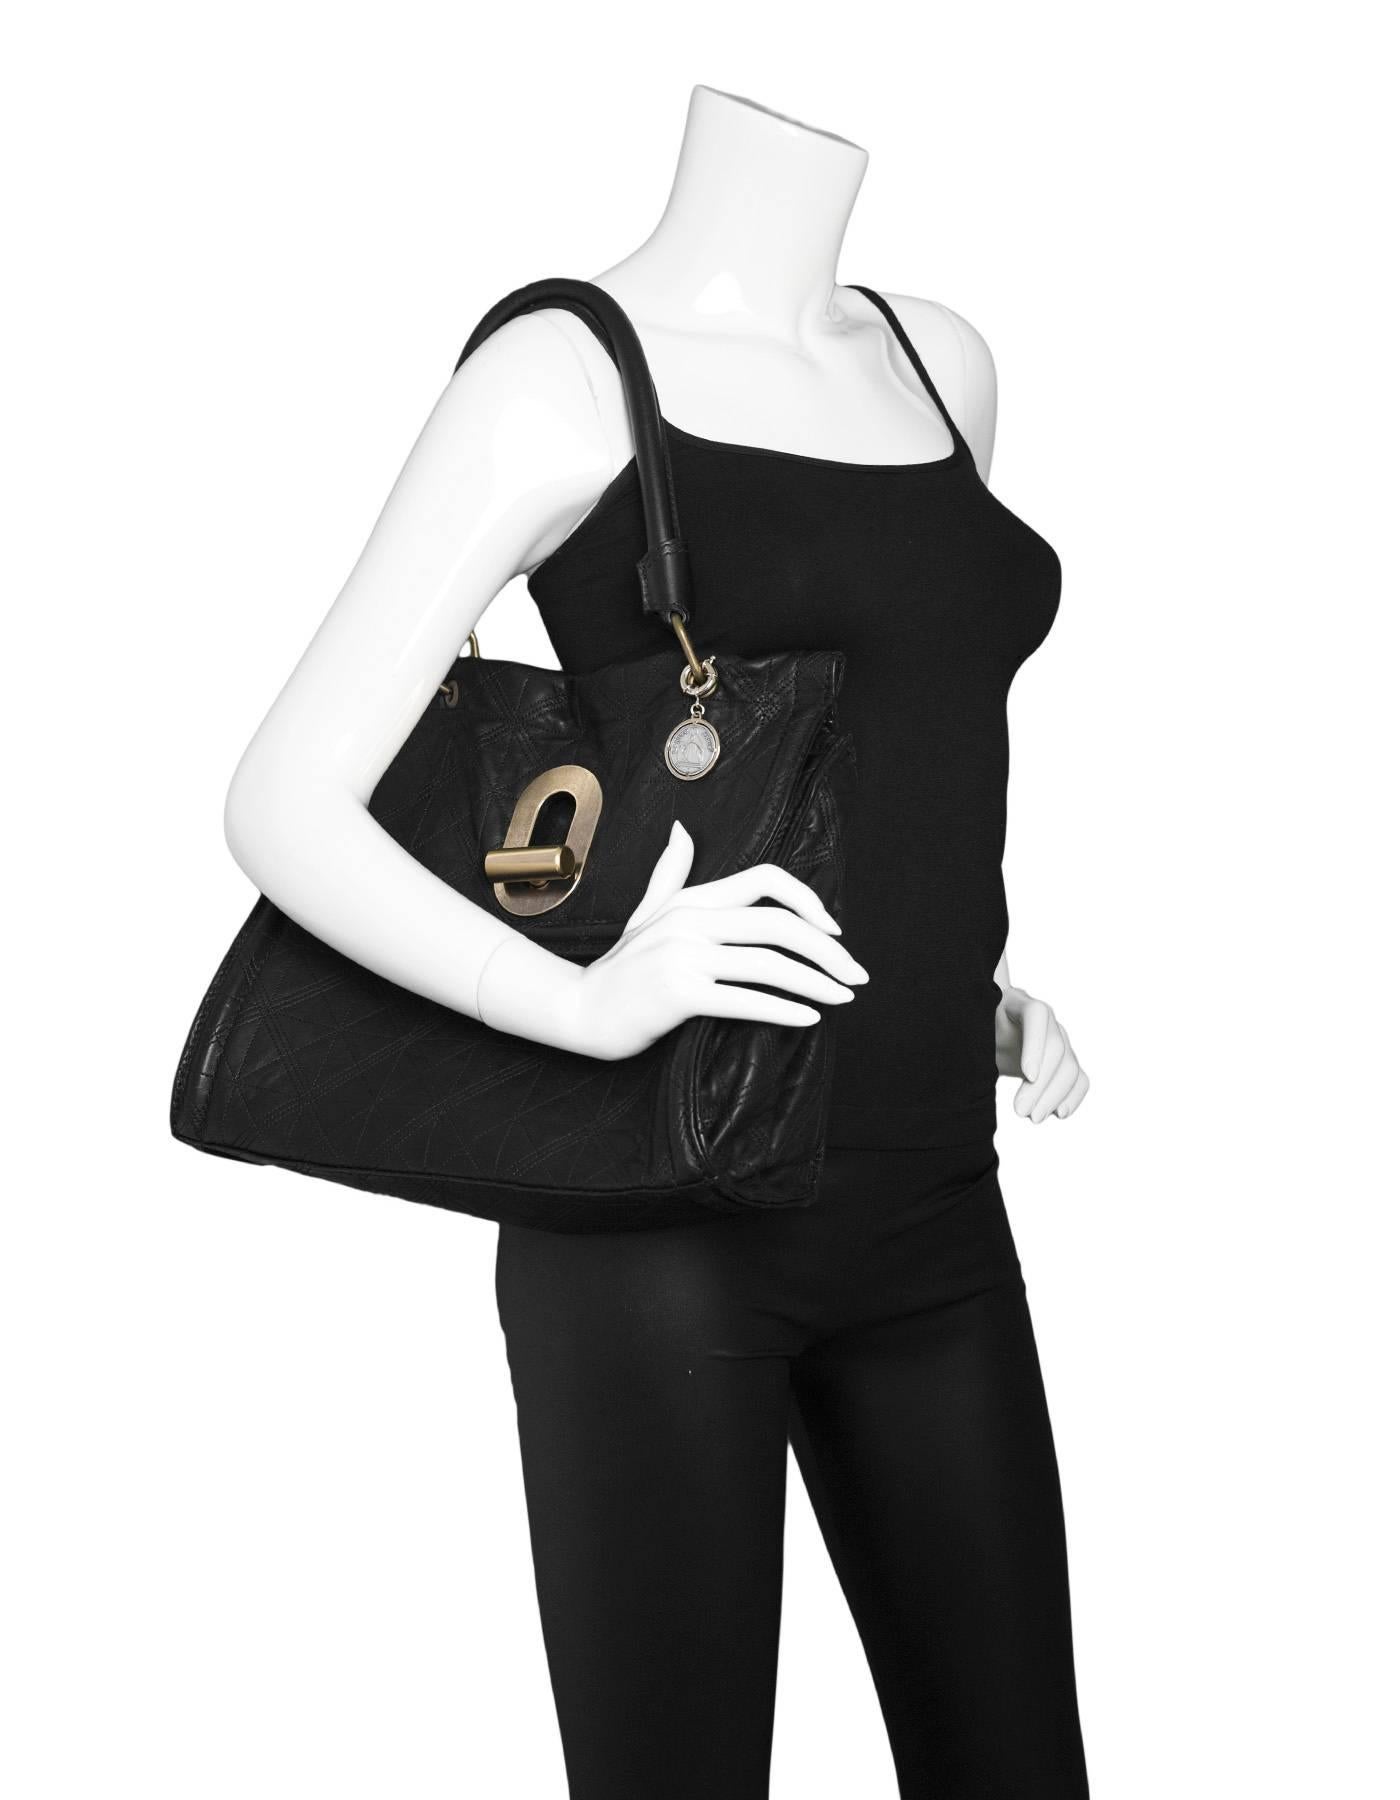 Lanvin Black Quilted Twist Lock Handle Bag

Made In: Italy
Color: Black
Hardware: Goldtone
Materials: Leather, metal
Lining: Black textile
Closure/Opening: Flap top with large twist lock
Exterior Pockets: None
Interior Pockets: Two large